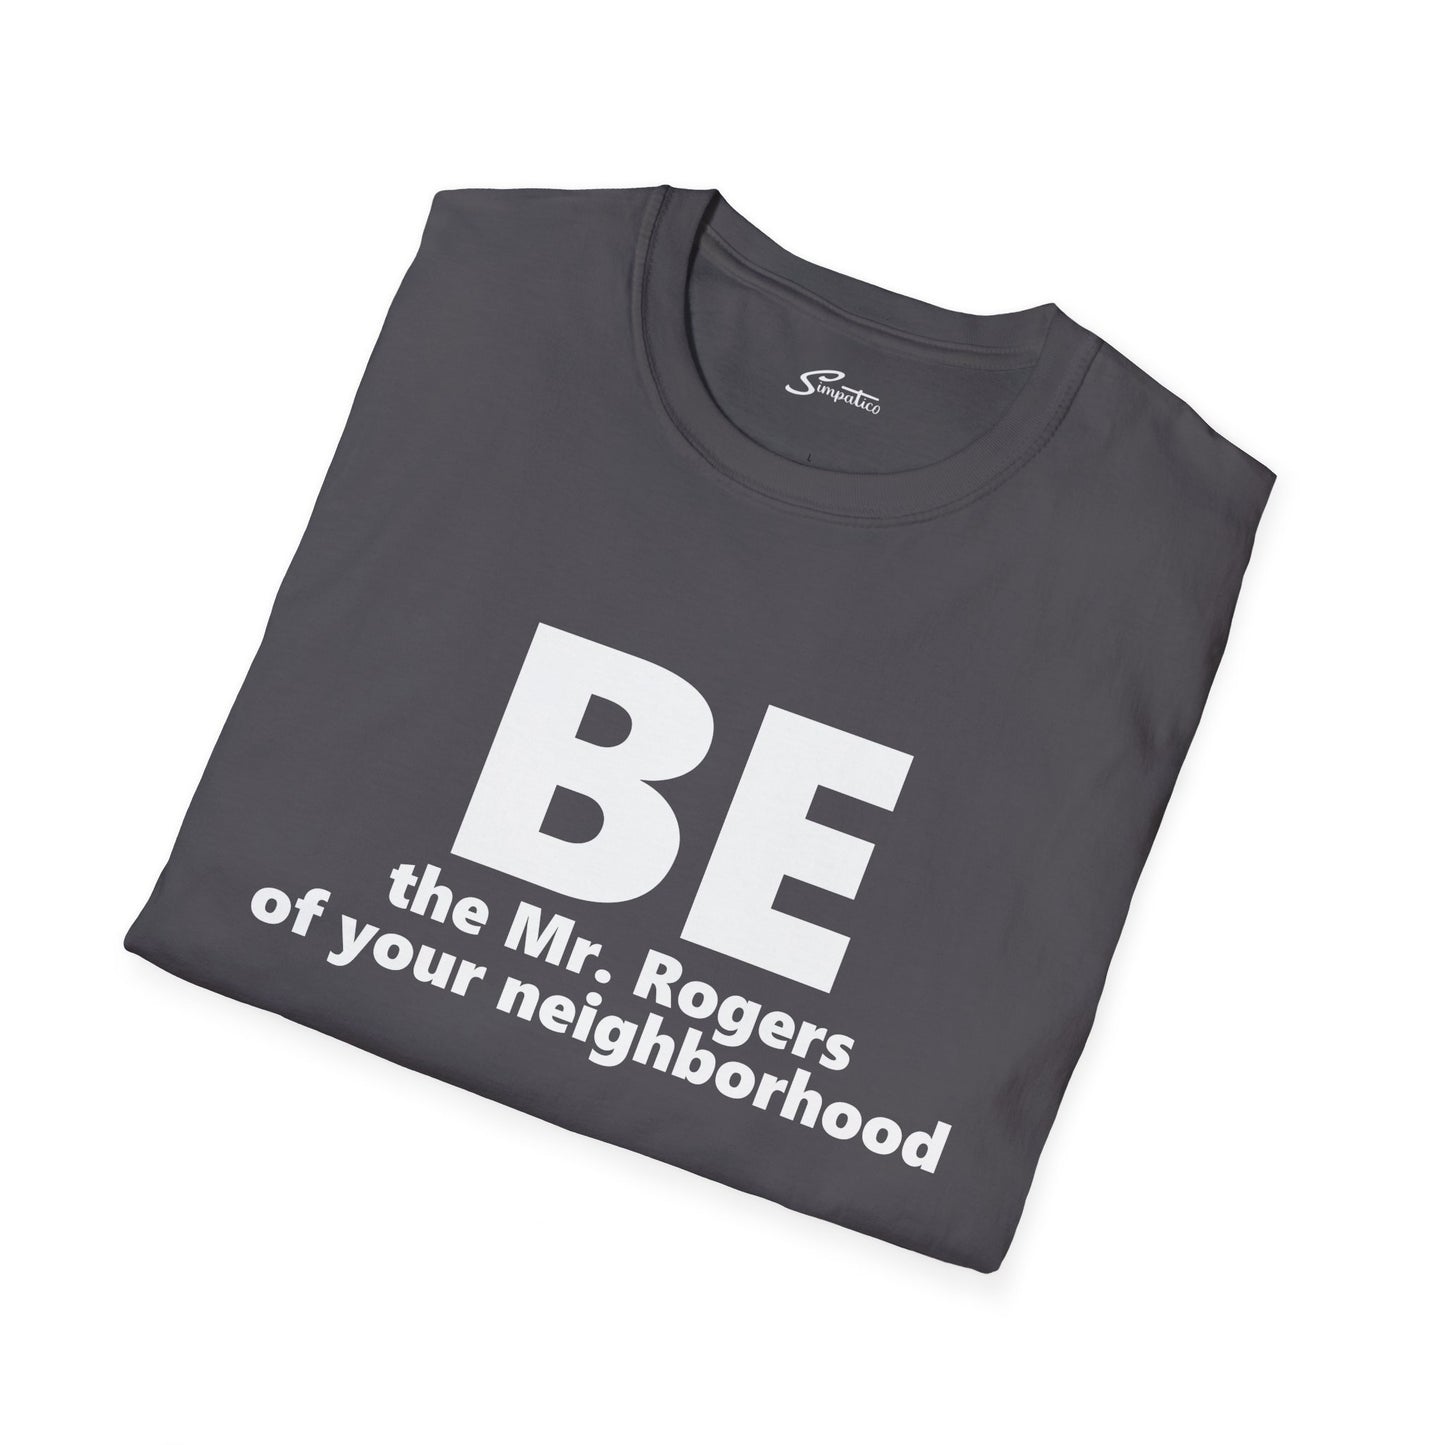 Be Mr. Rogers - Conway T-Shirt